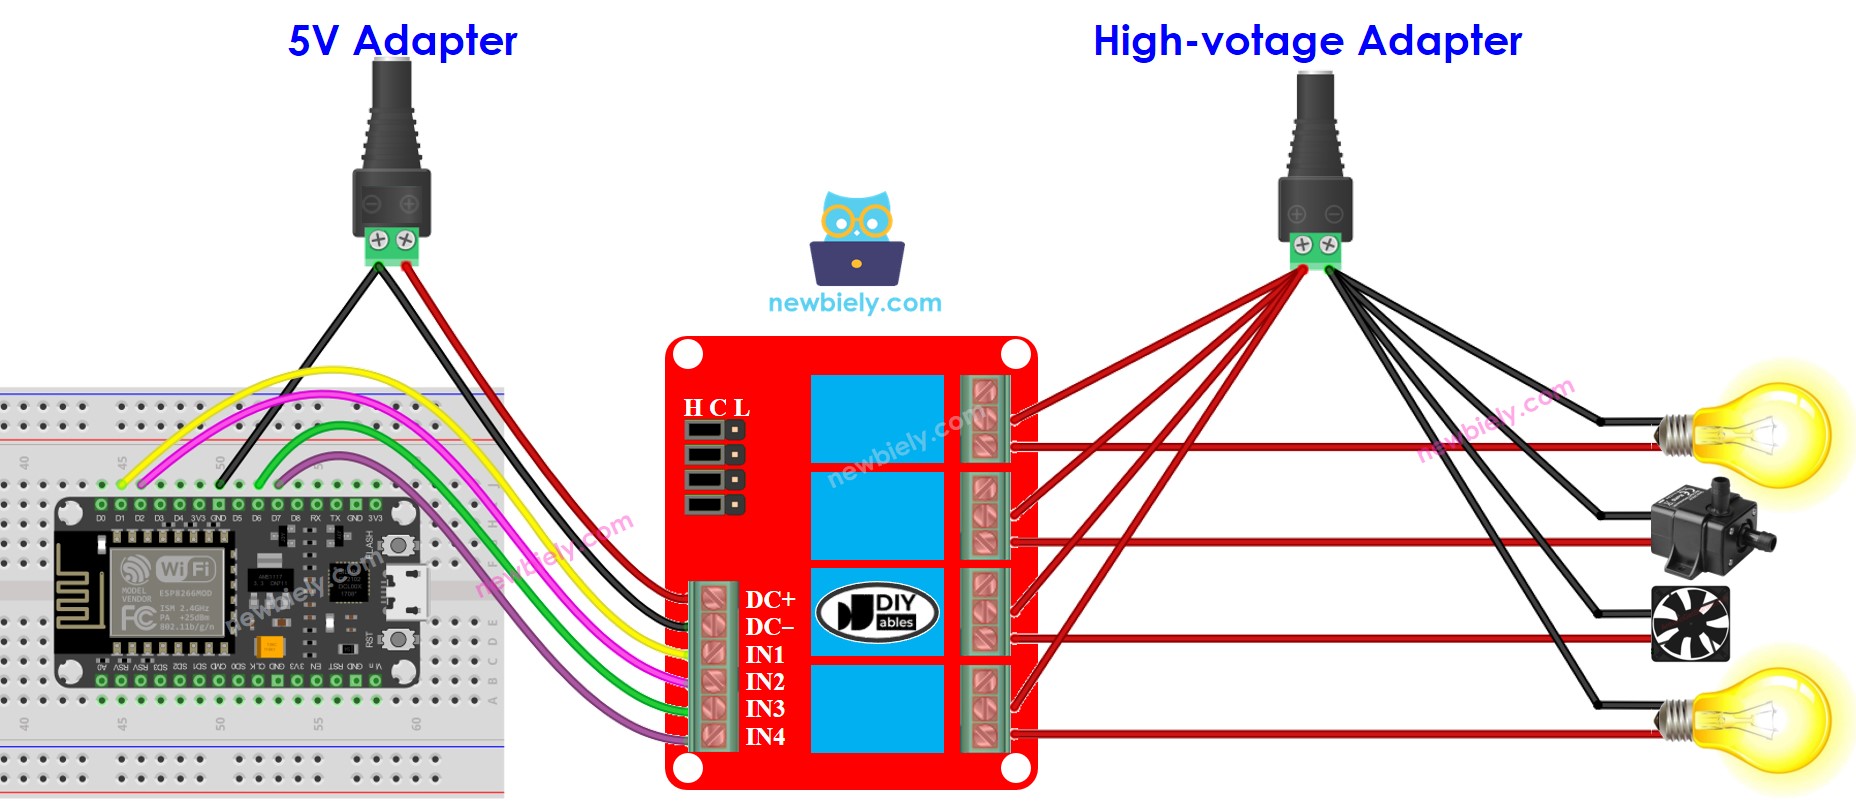 The wiring diagram between ESP8266 NodeMCU and 4-channel relay module